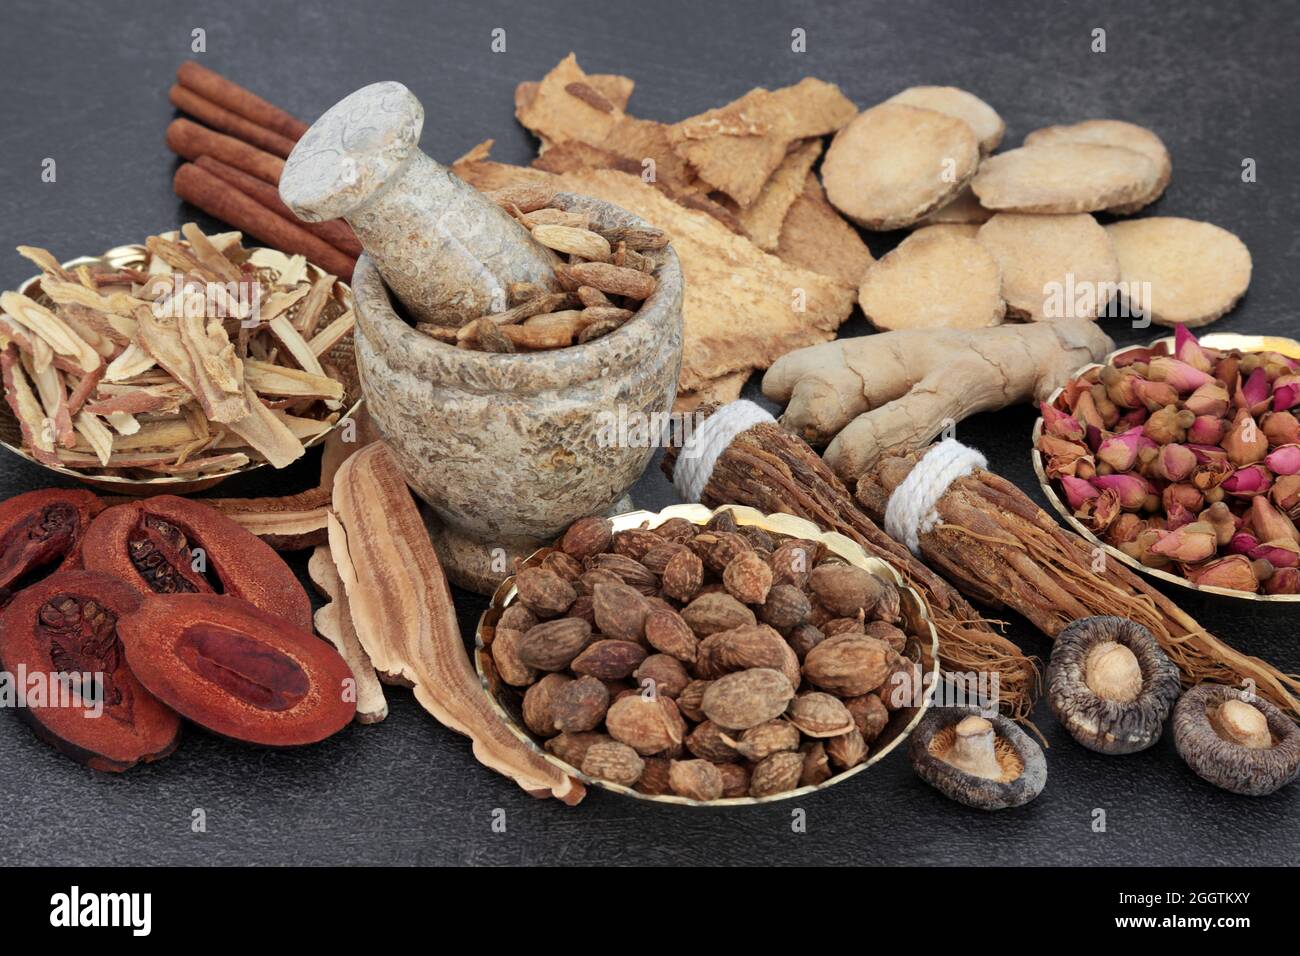 Chinese plant based herbal medicine with a collection of herbs and spice on slate background used in traditional natural healing remedies. Stock Photo